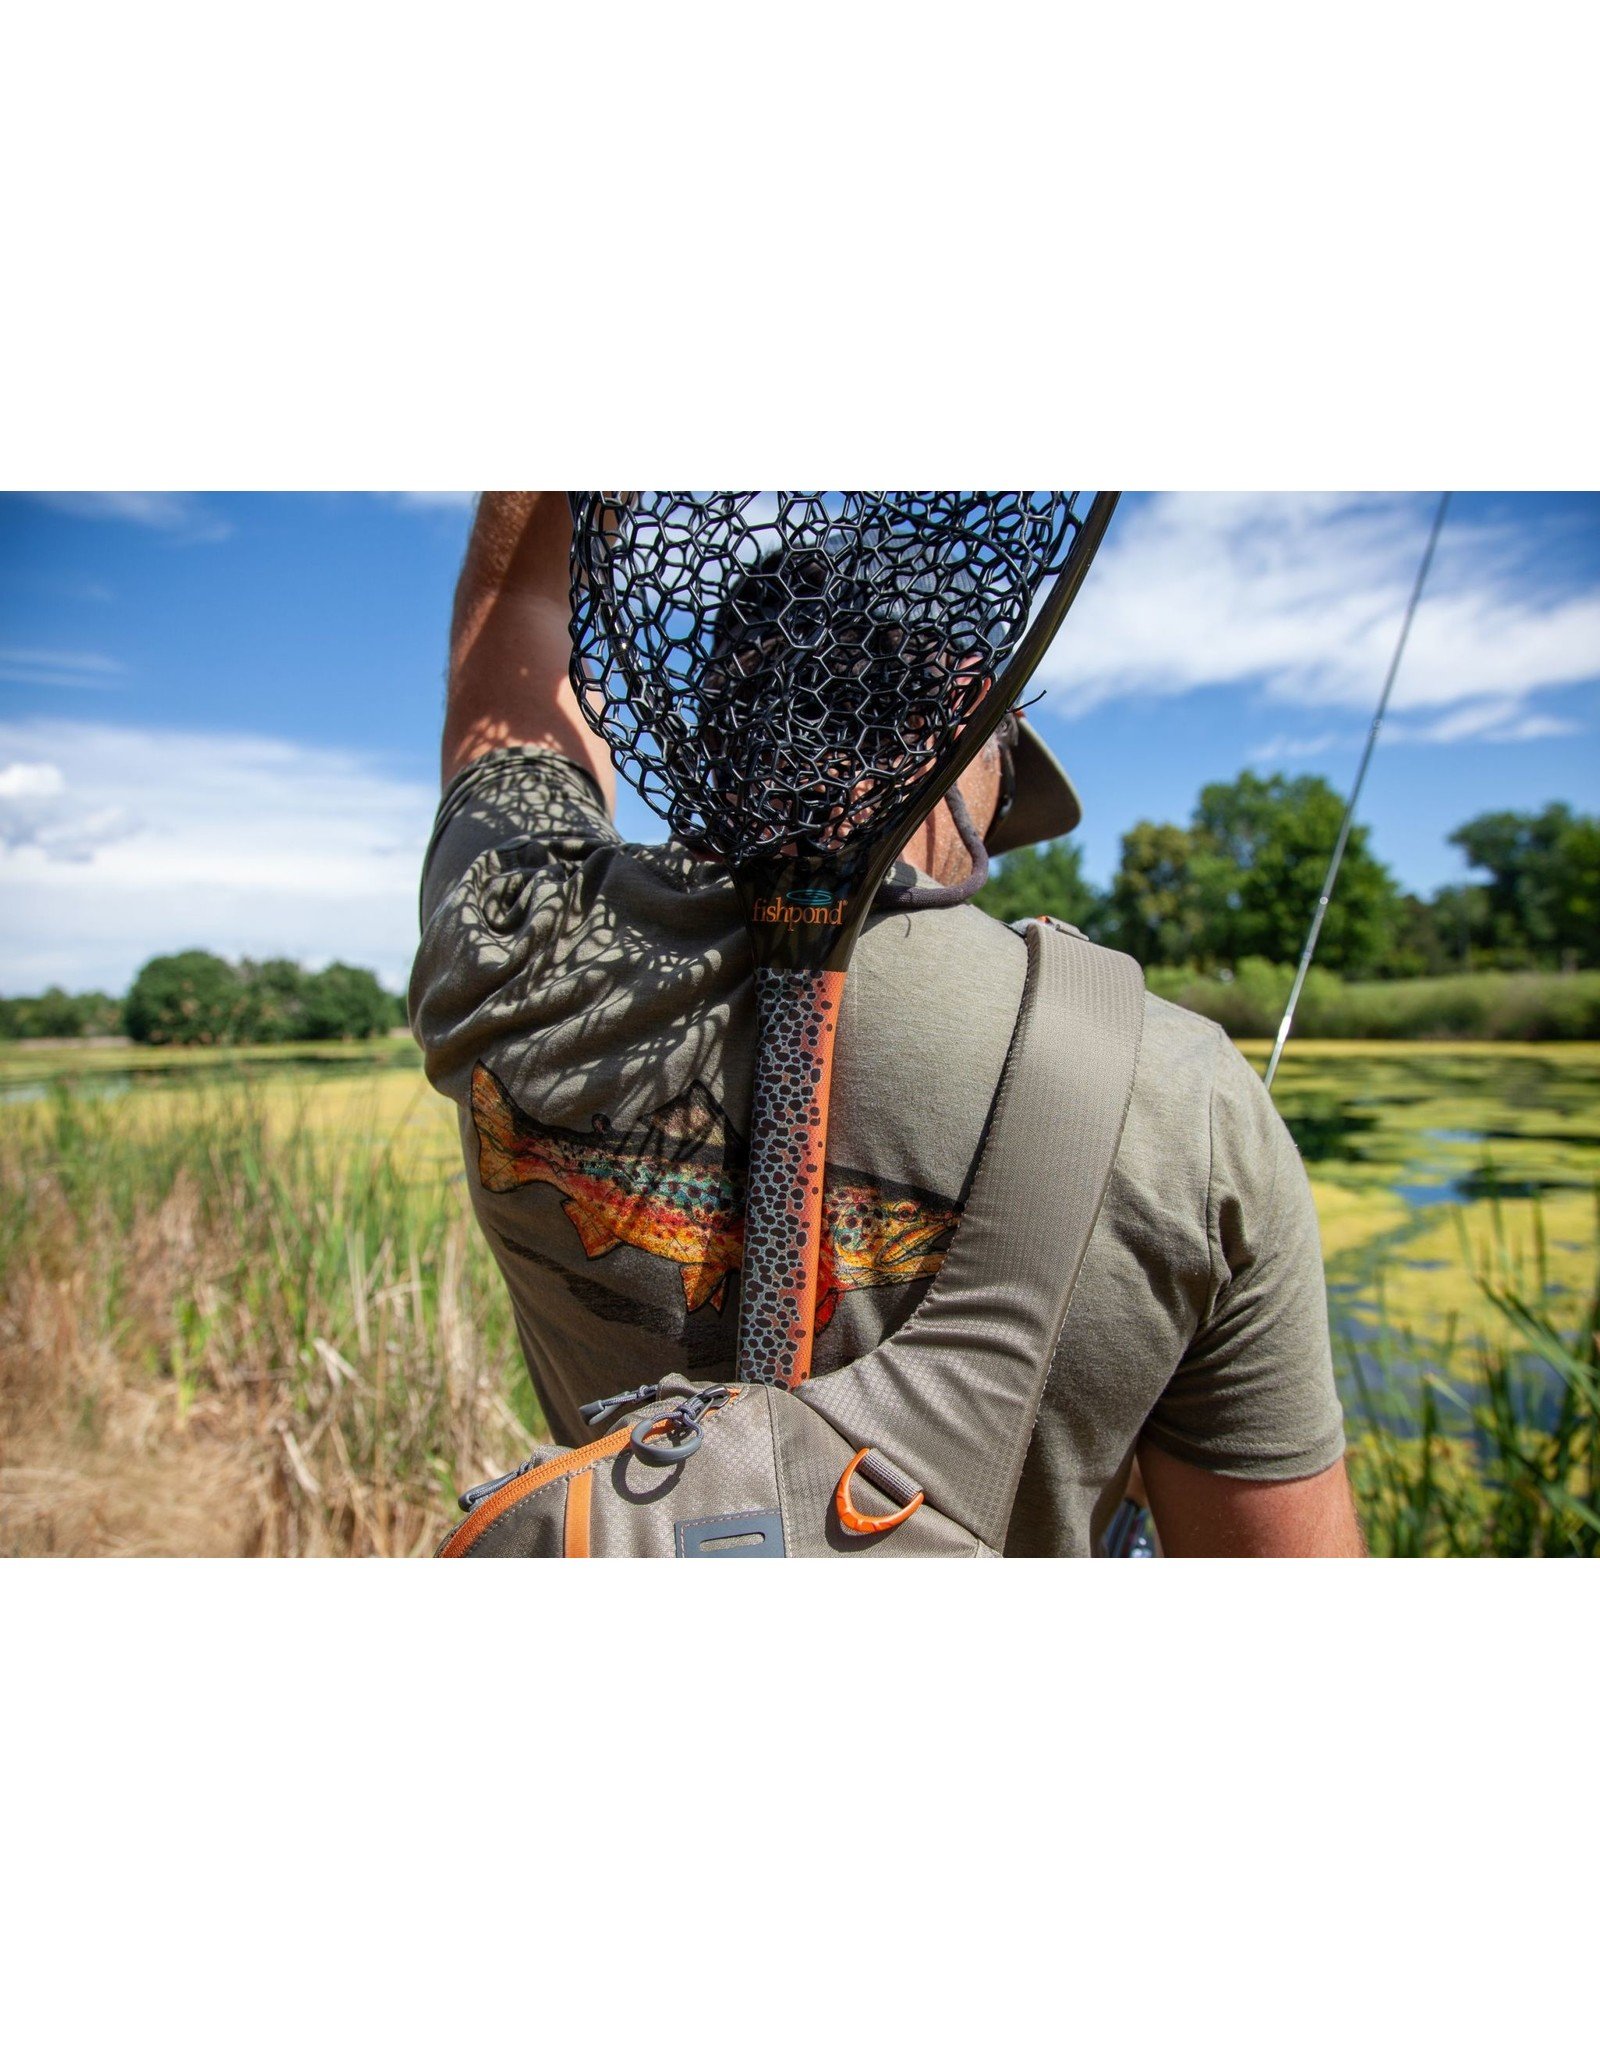 Fishpond Nomad Mid-Length Net (Slab-Brown Trout Special Edition) - Royal  Gorge Anglers